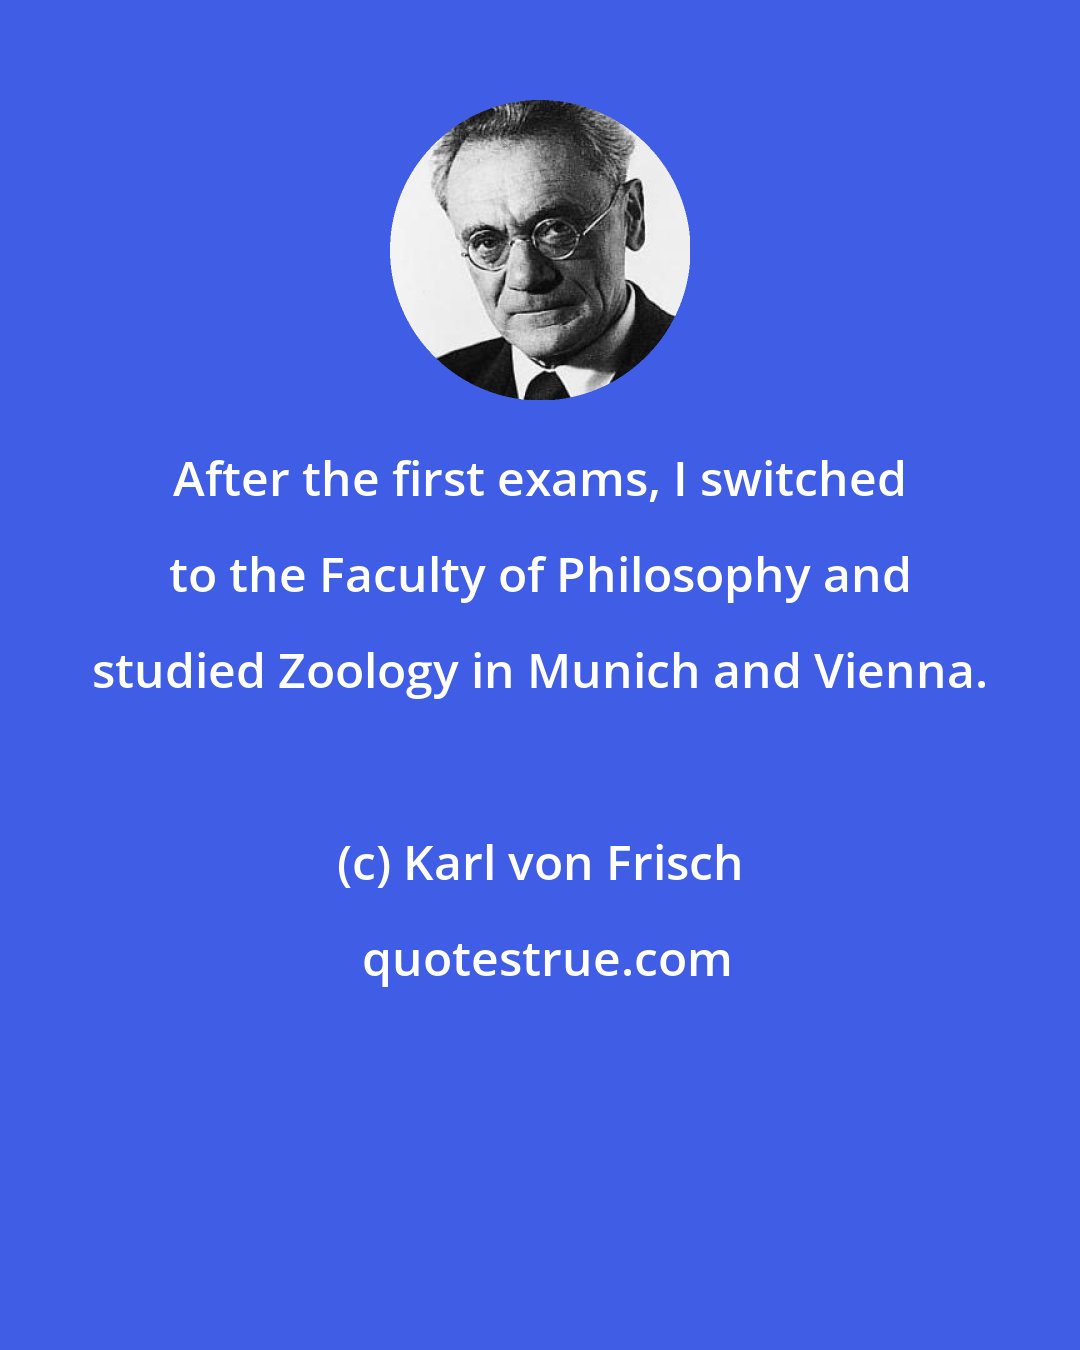 Karl von Frisch: After the first exams, I switched to the Faculty of Philosophy and studied Zoology in Munich and Vienna.